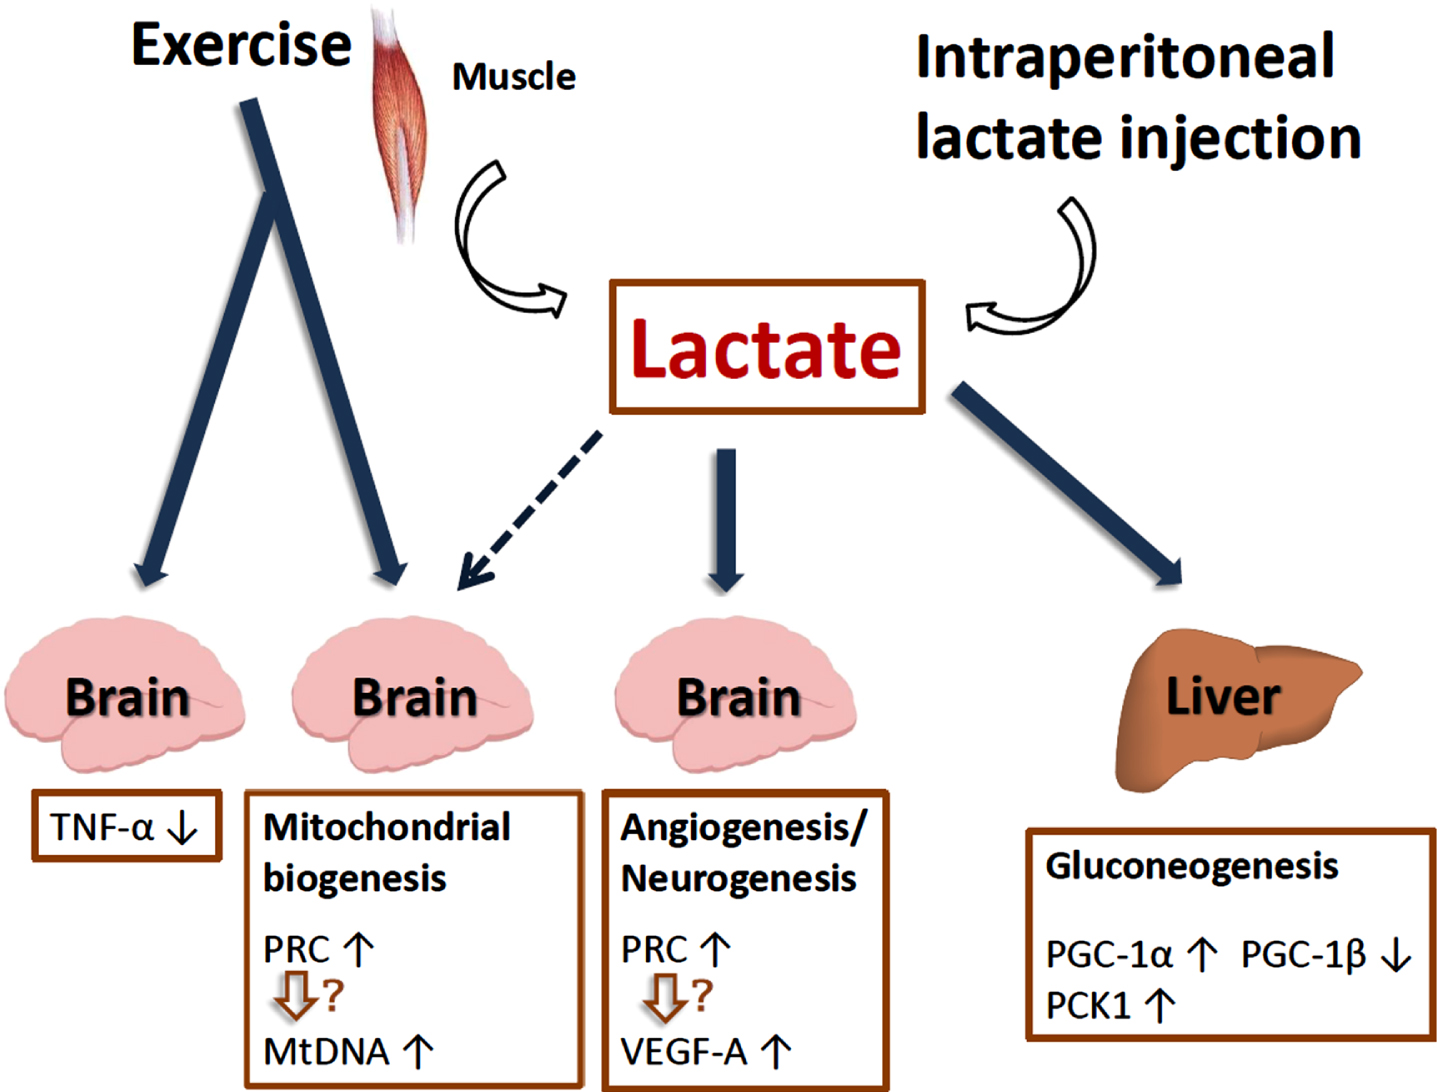 Lactate plays a role in adult neurogenesis, hippocampal BDNF expression, mitochondrial biogenesis and reduction of inflammation.